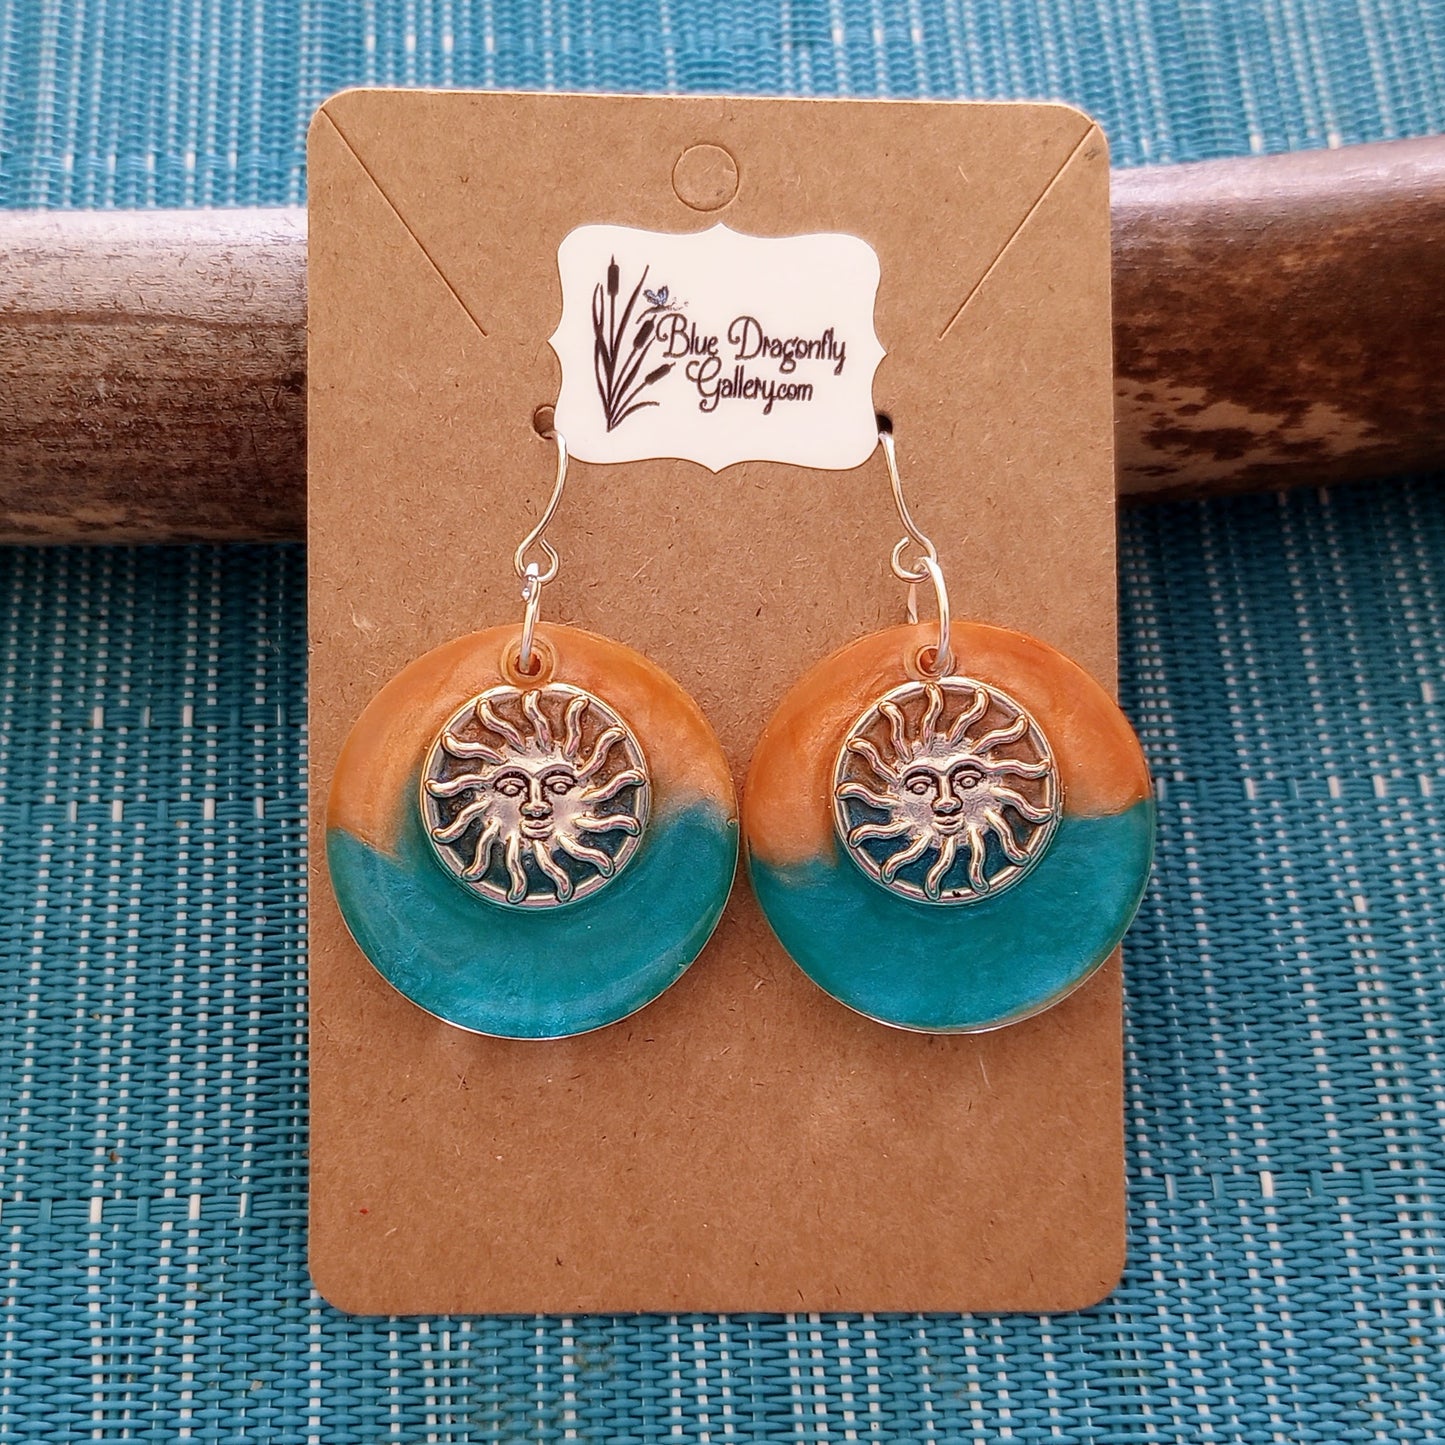 Round shaped earrings